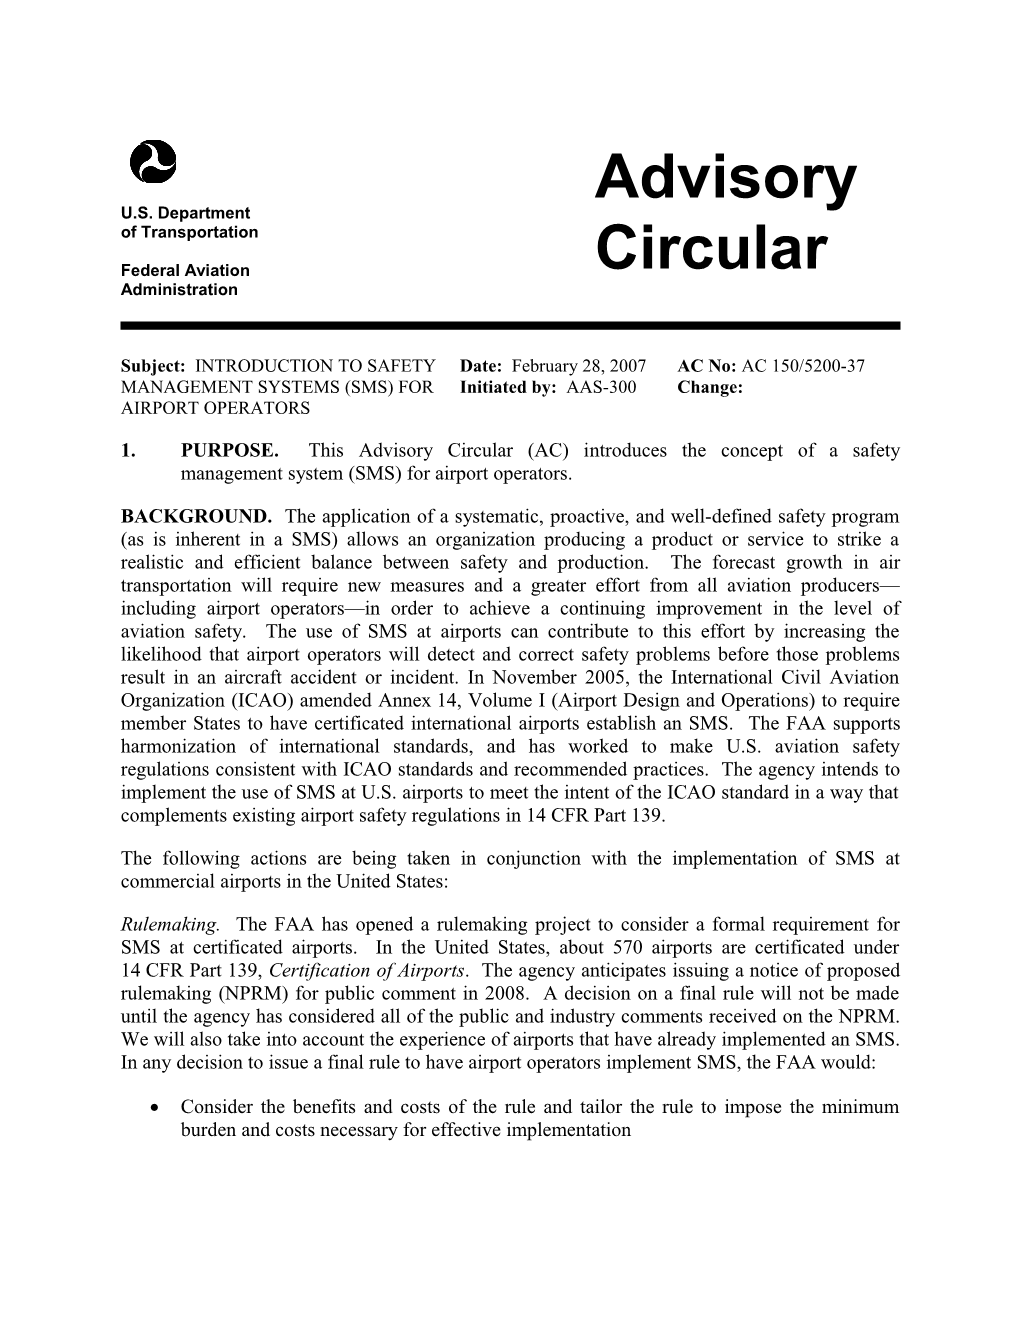 1. PURPOSE. This Advisory Circular (AC) Introduces the Concept of a Safety Management System